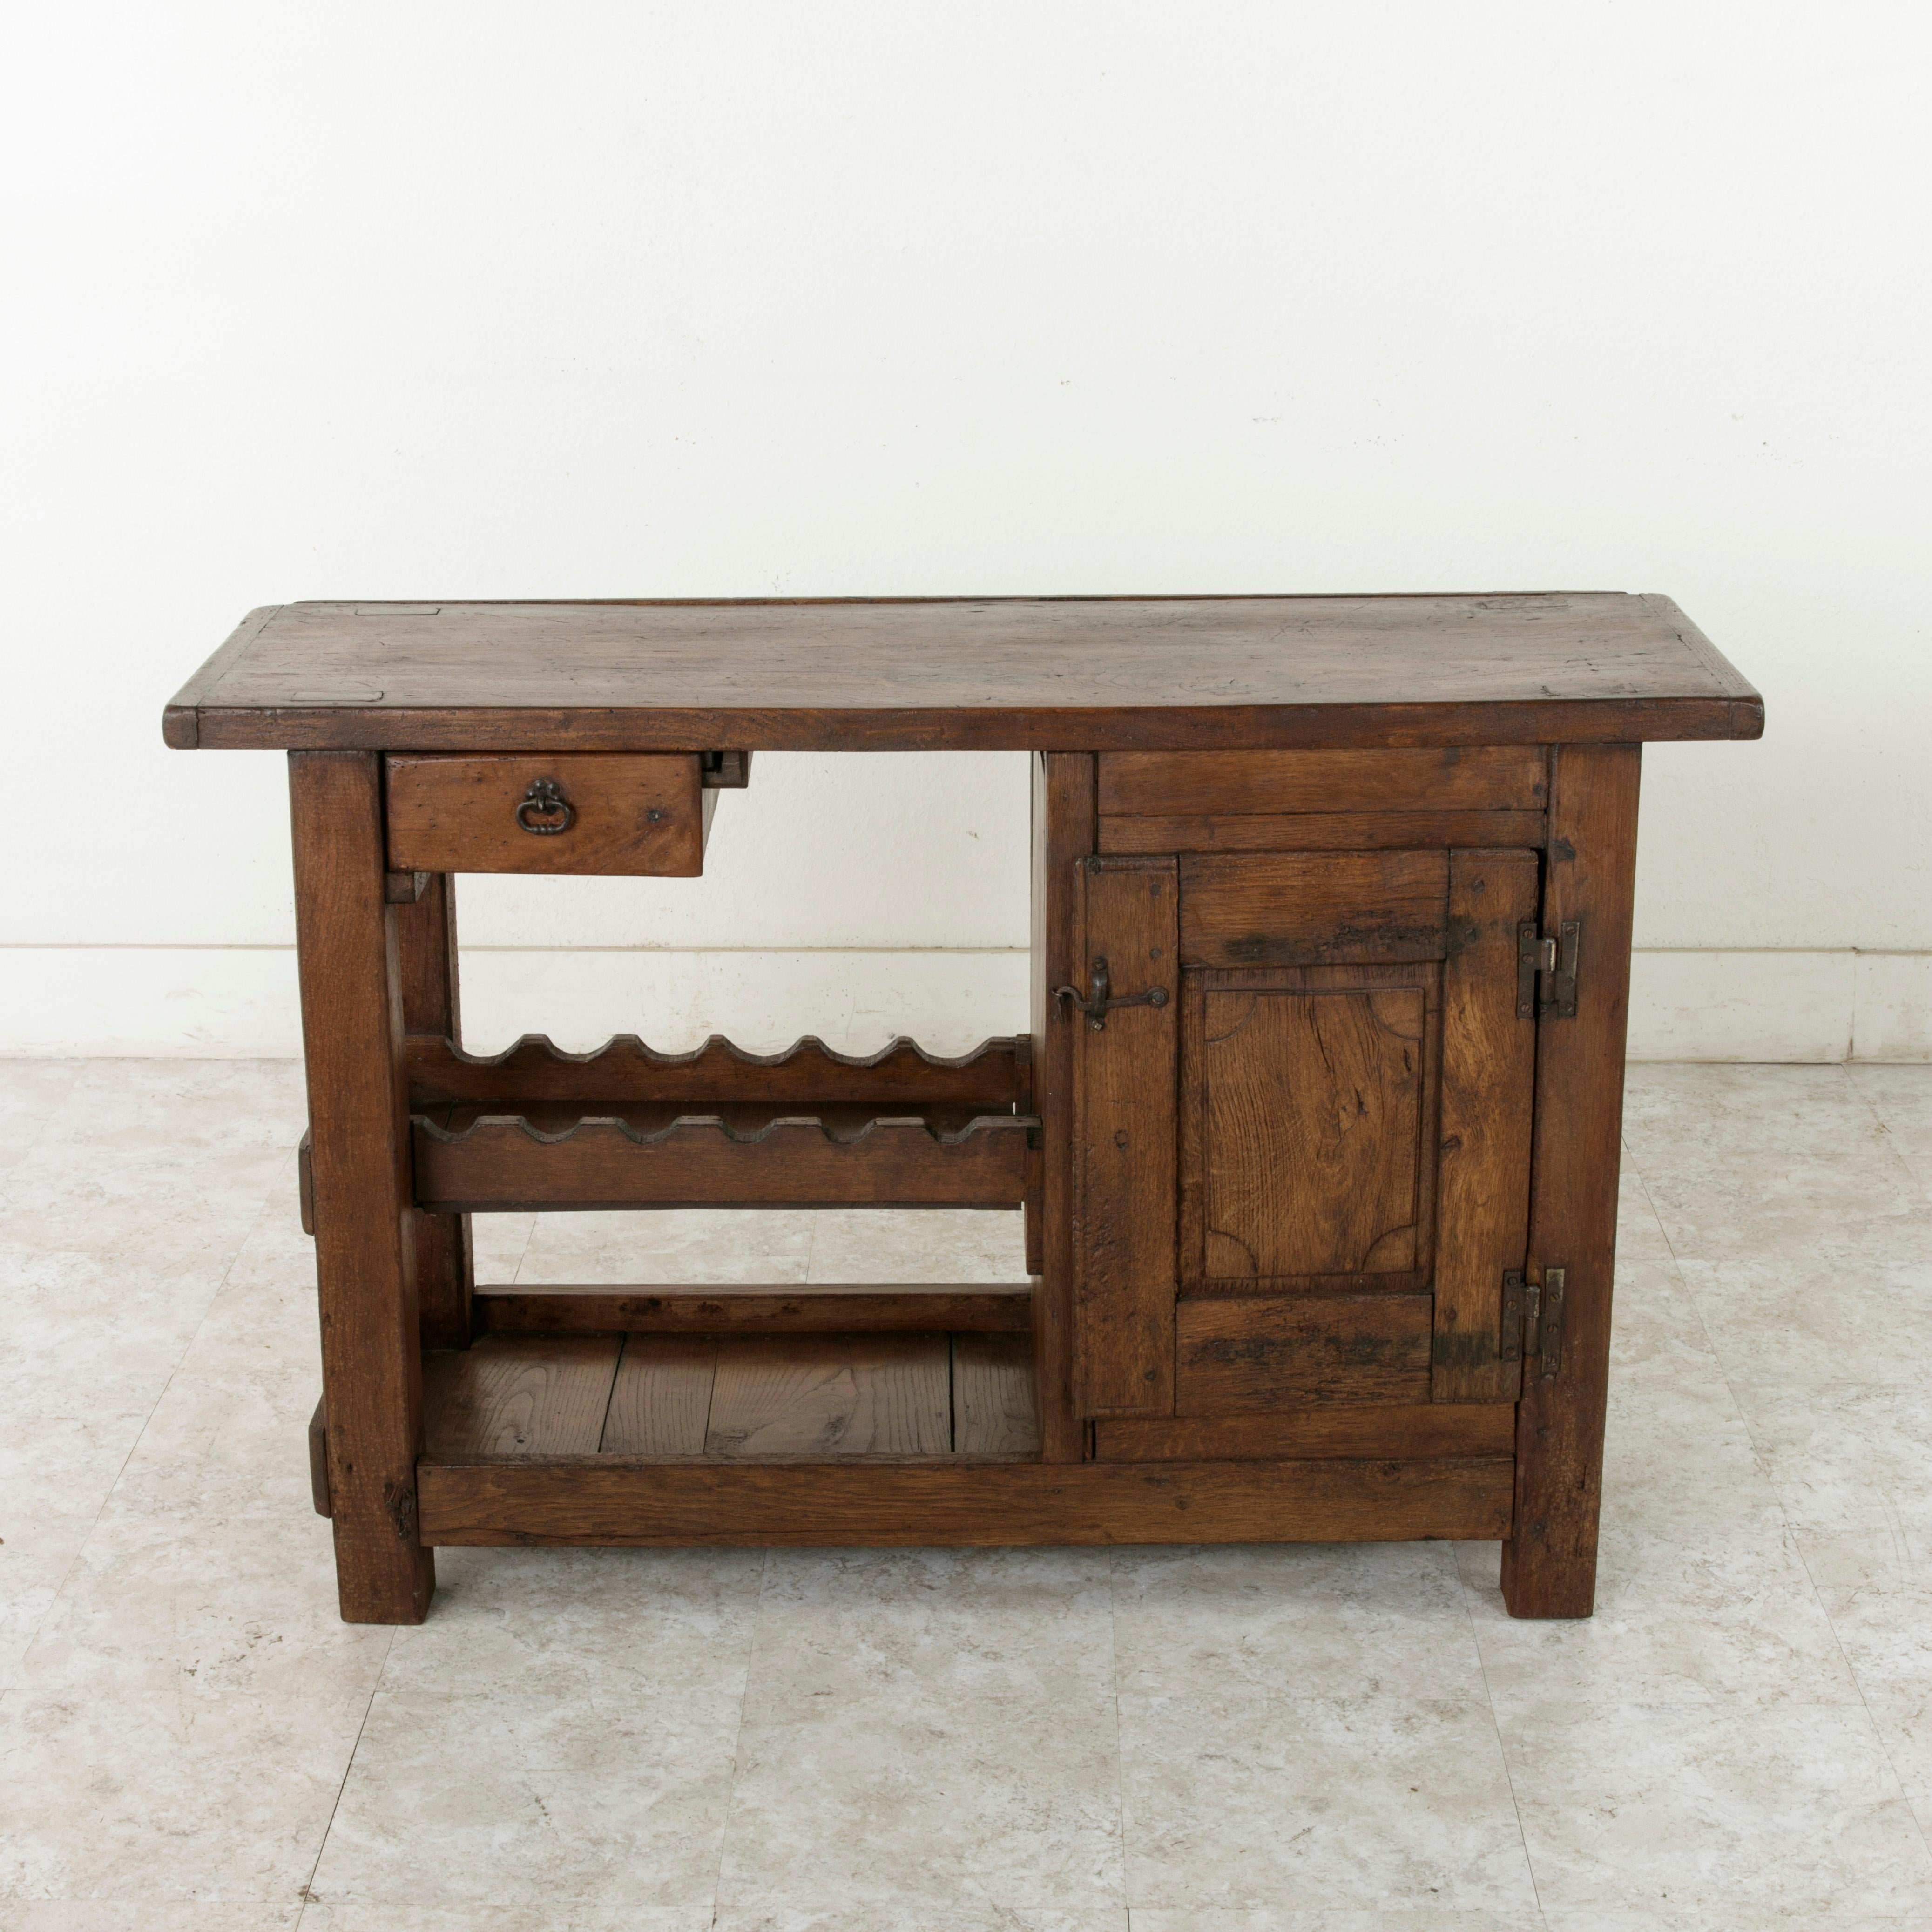 Rustic Early 20th Century French Oak Work Bench, Console Table, Sofa Table, Dry Bar